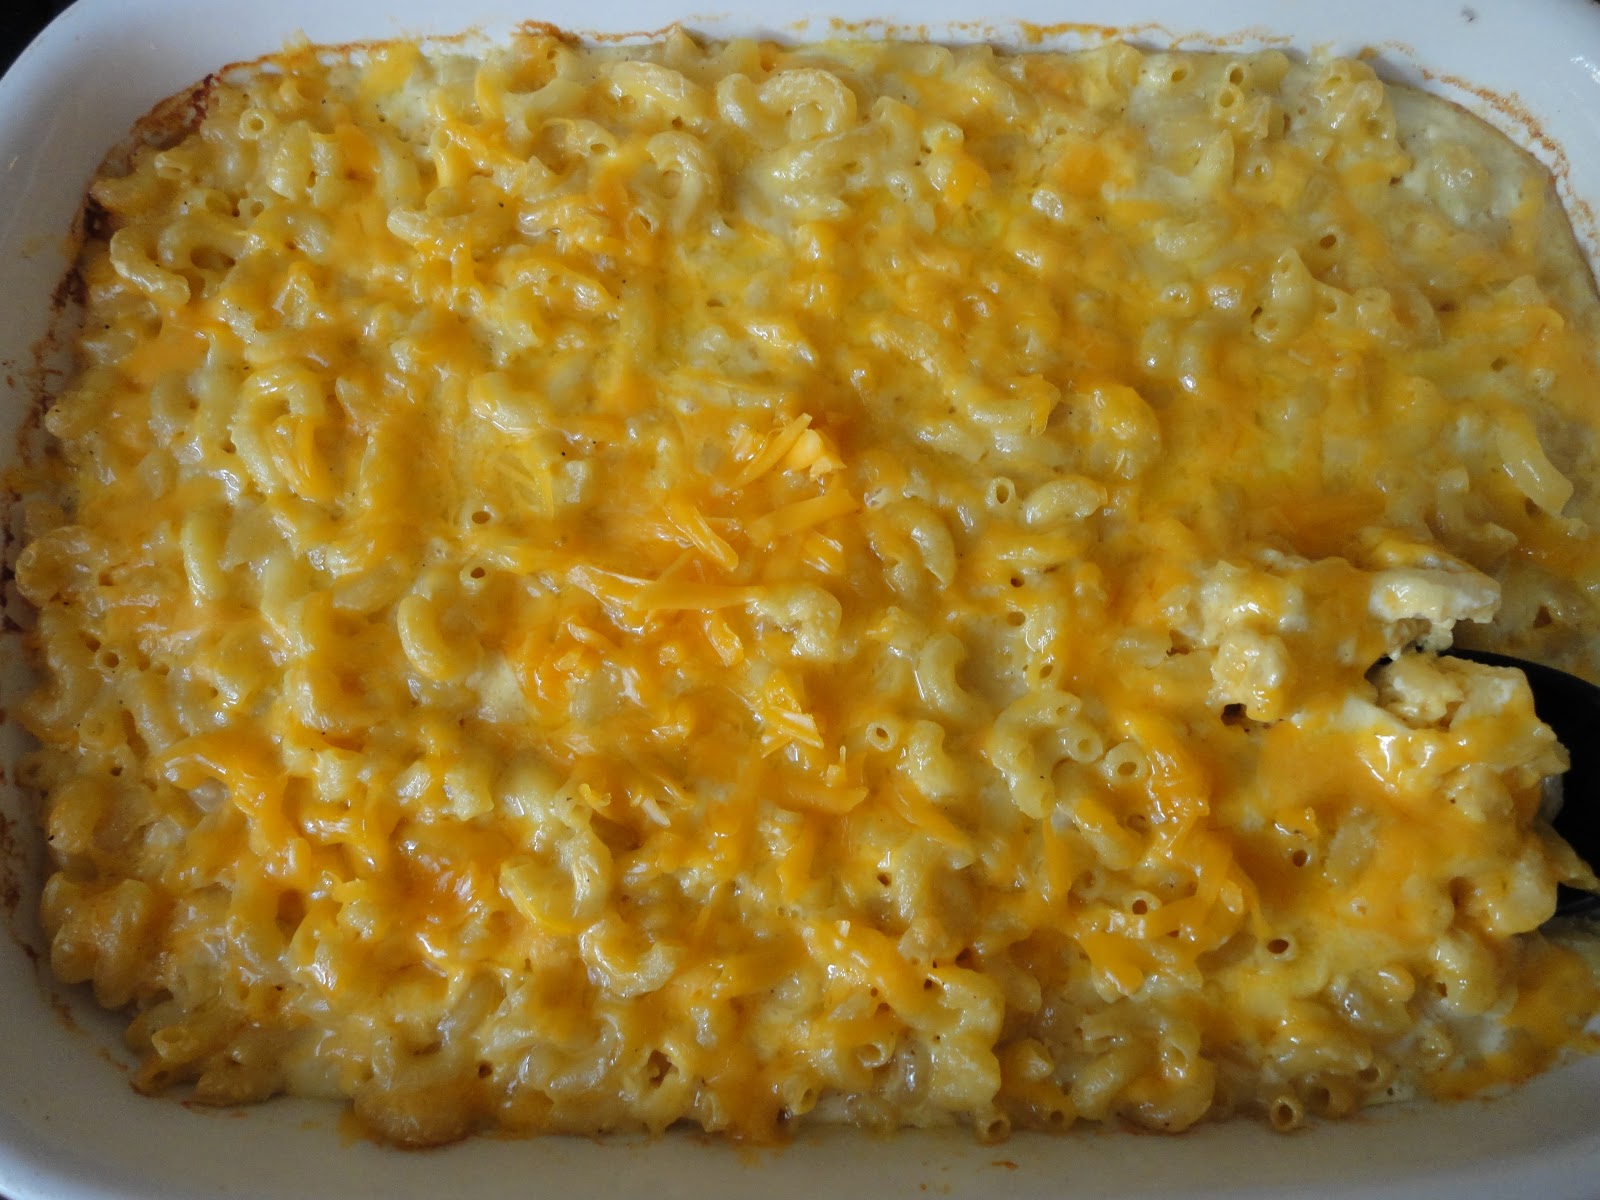 Tnt-cook: Baked Macaroni and Cheese